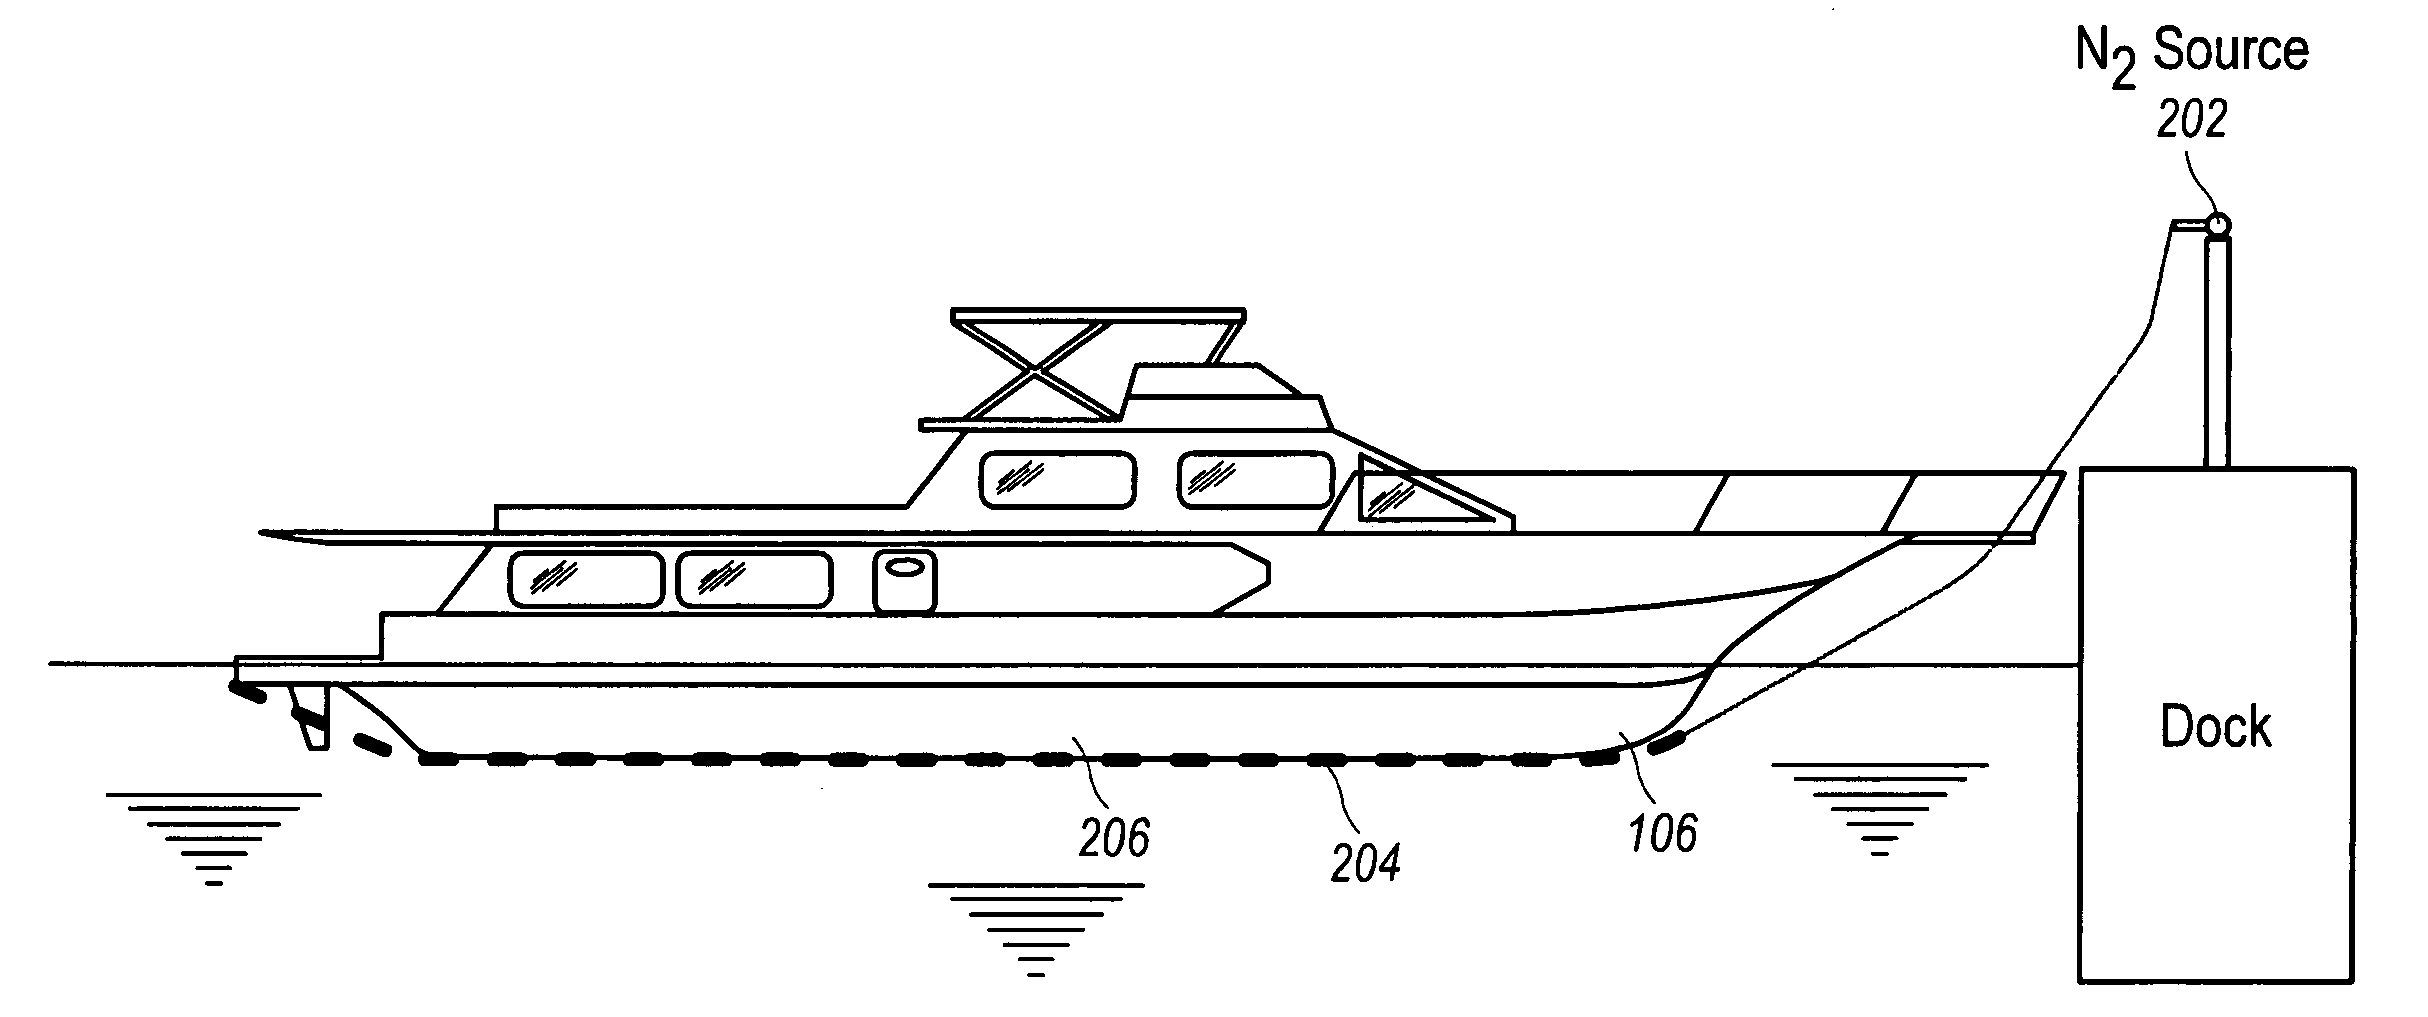 Yacht barnacle inhibitor system